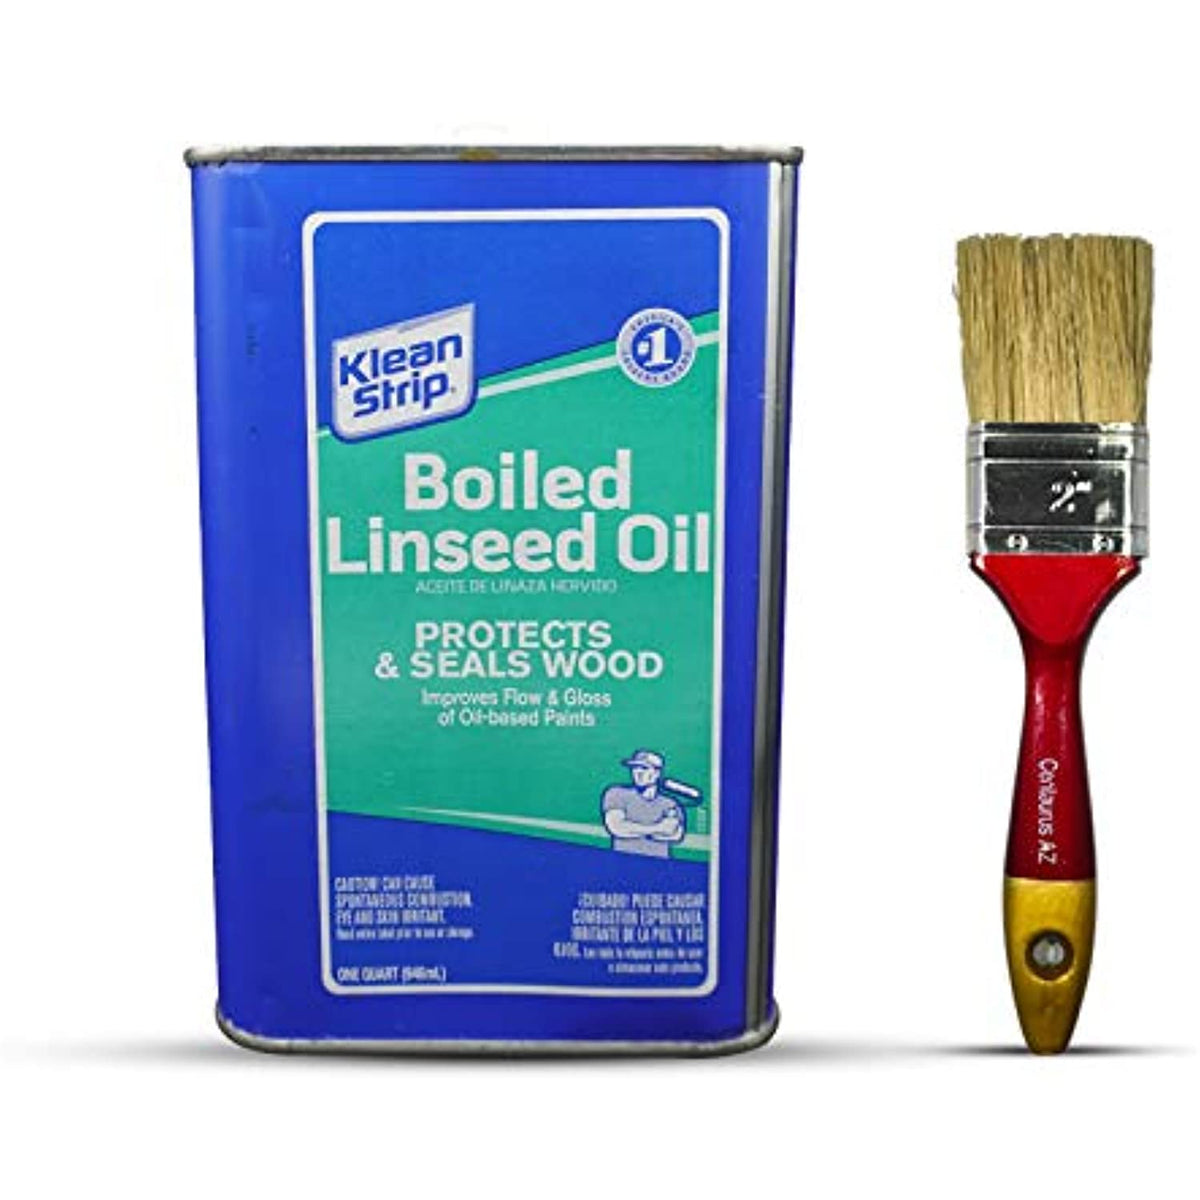 Klean Strip Boiled Linseed Oil 1 Quart with Centaurus AZ Paintbrush  Protects Seals Unfinished Wood Produce Beautiful Finish Waterproof Wood  Improves